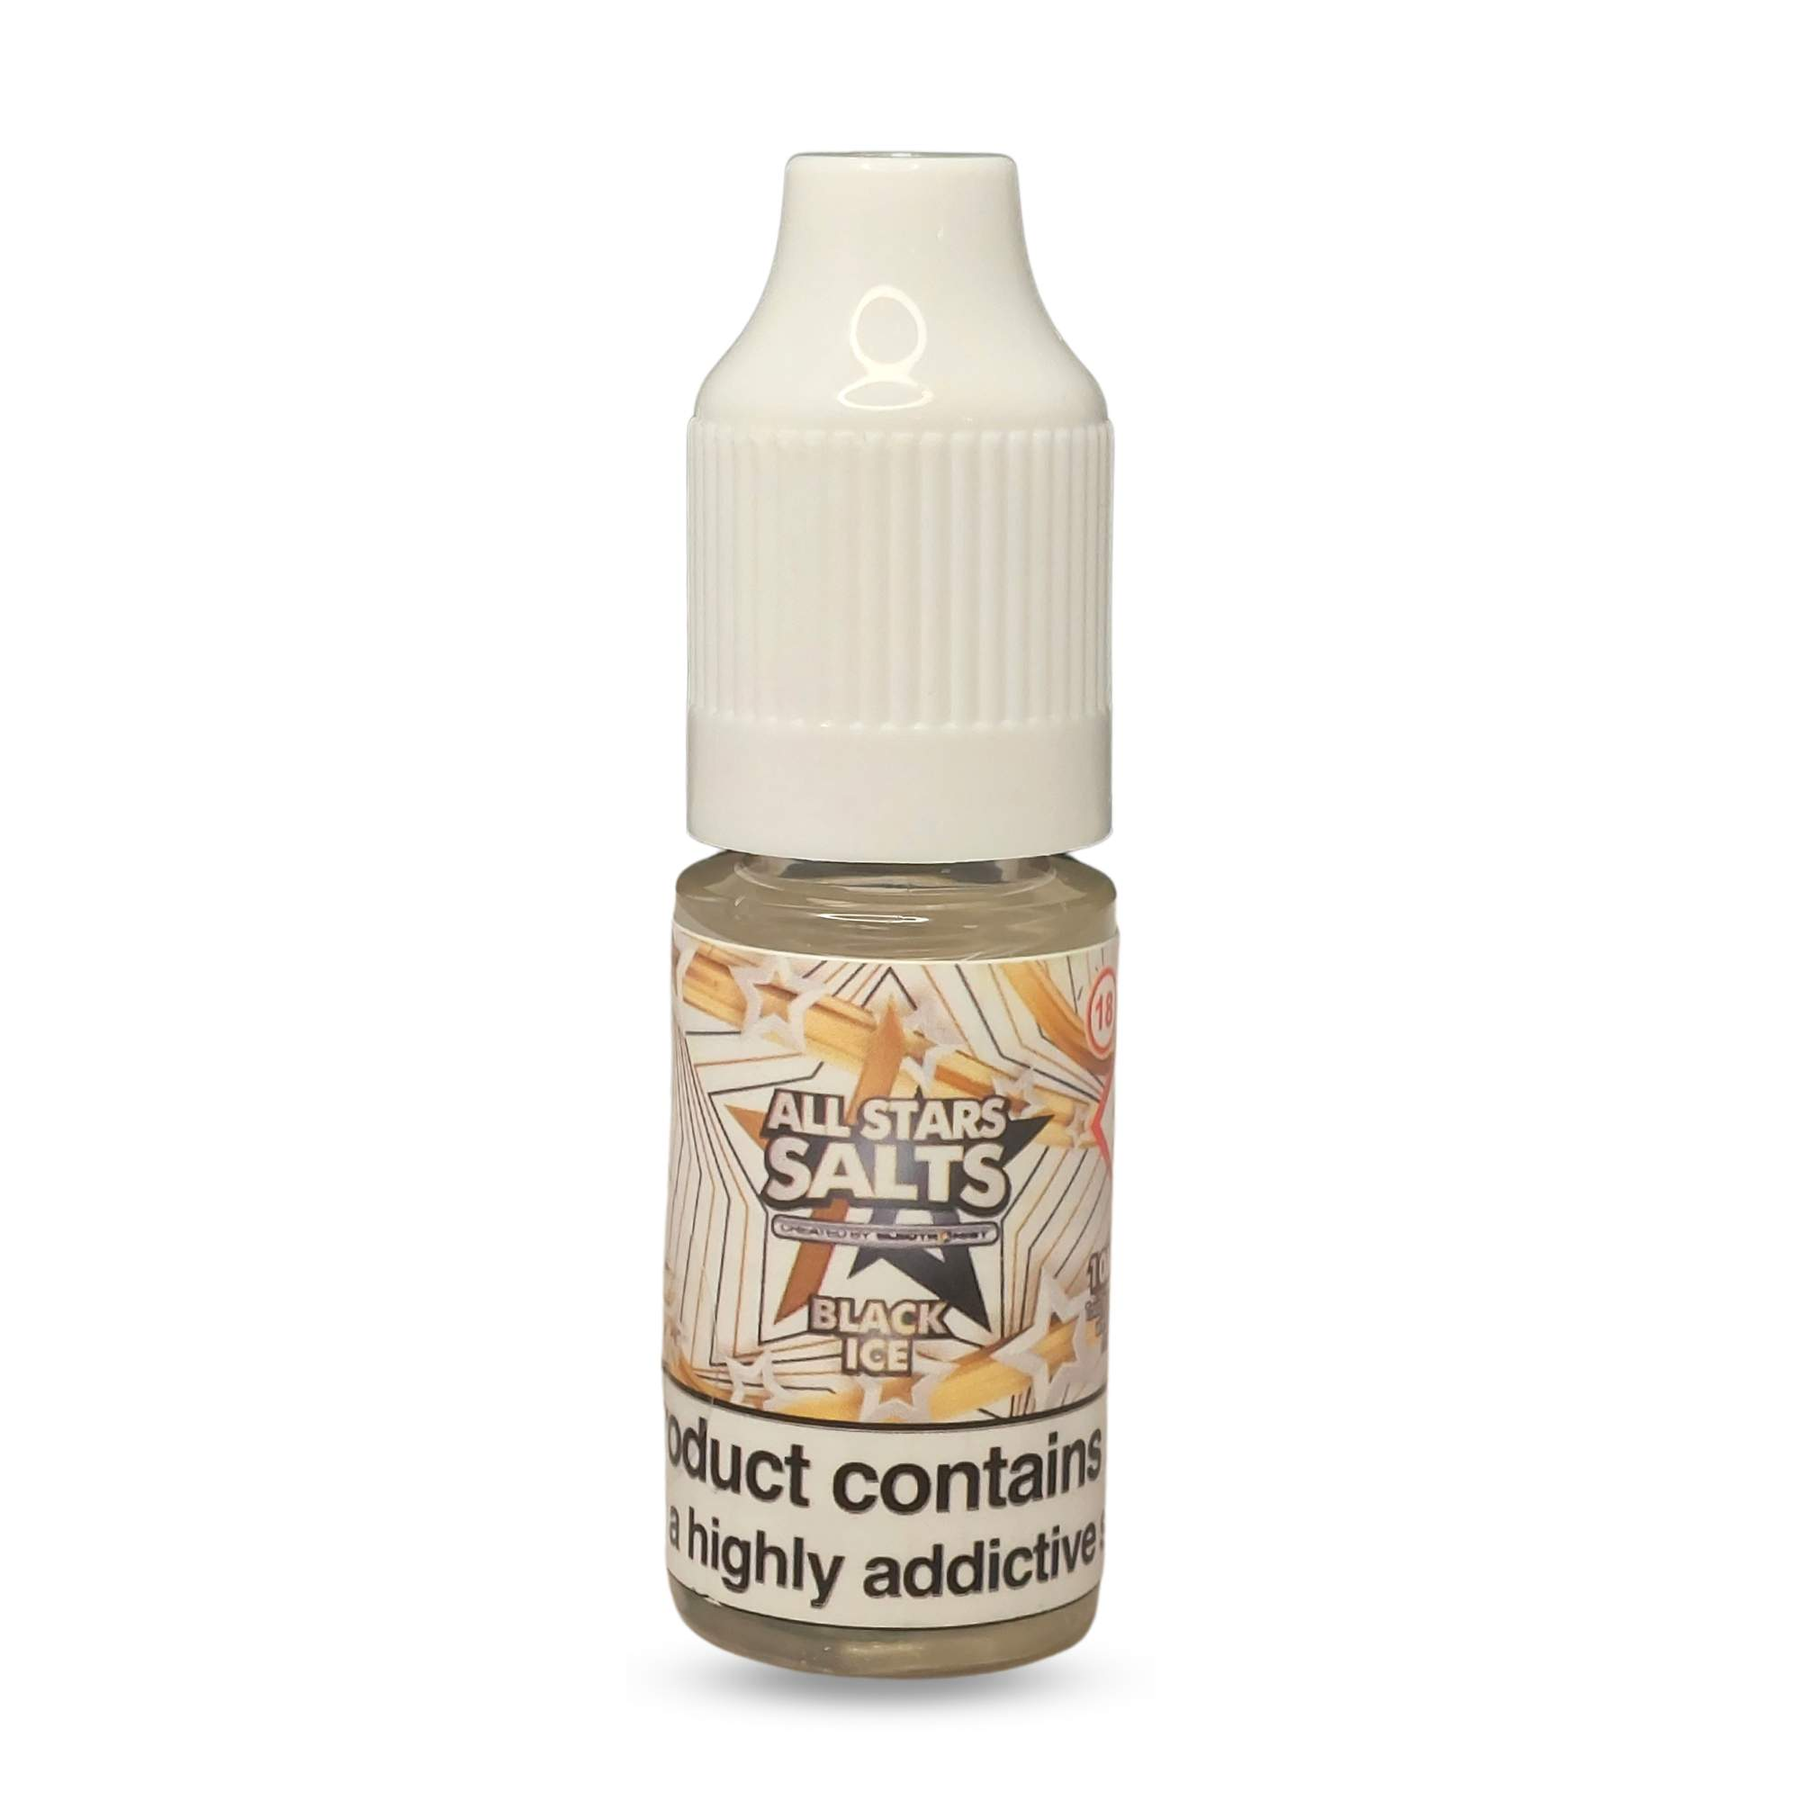 All Stars Salts from the vape brand you can trust, Electromist, . Get your taste buds ready for a flavour sensation, Black Ice. Nicotine Content: 6mg/12mg/18mg Products may contain nicotine. For over 18s Only ejuice, vape pen, eliquid, e cigarette, 10ml, vaping, cloud, PG, VG, 60/40, vape liquid, Flavour, TPD